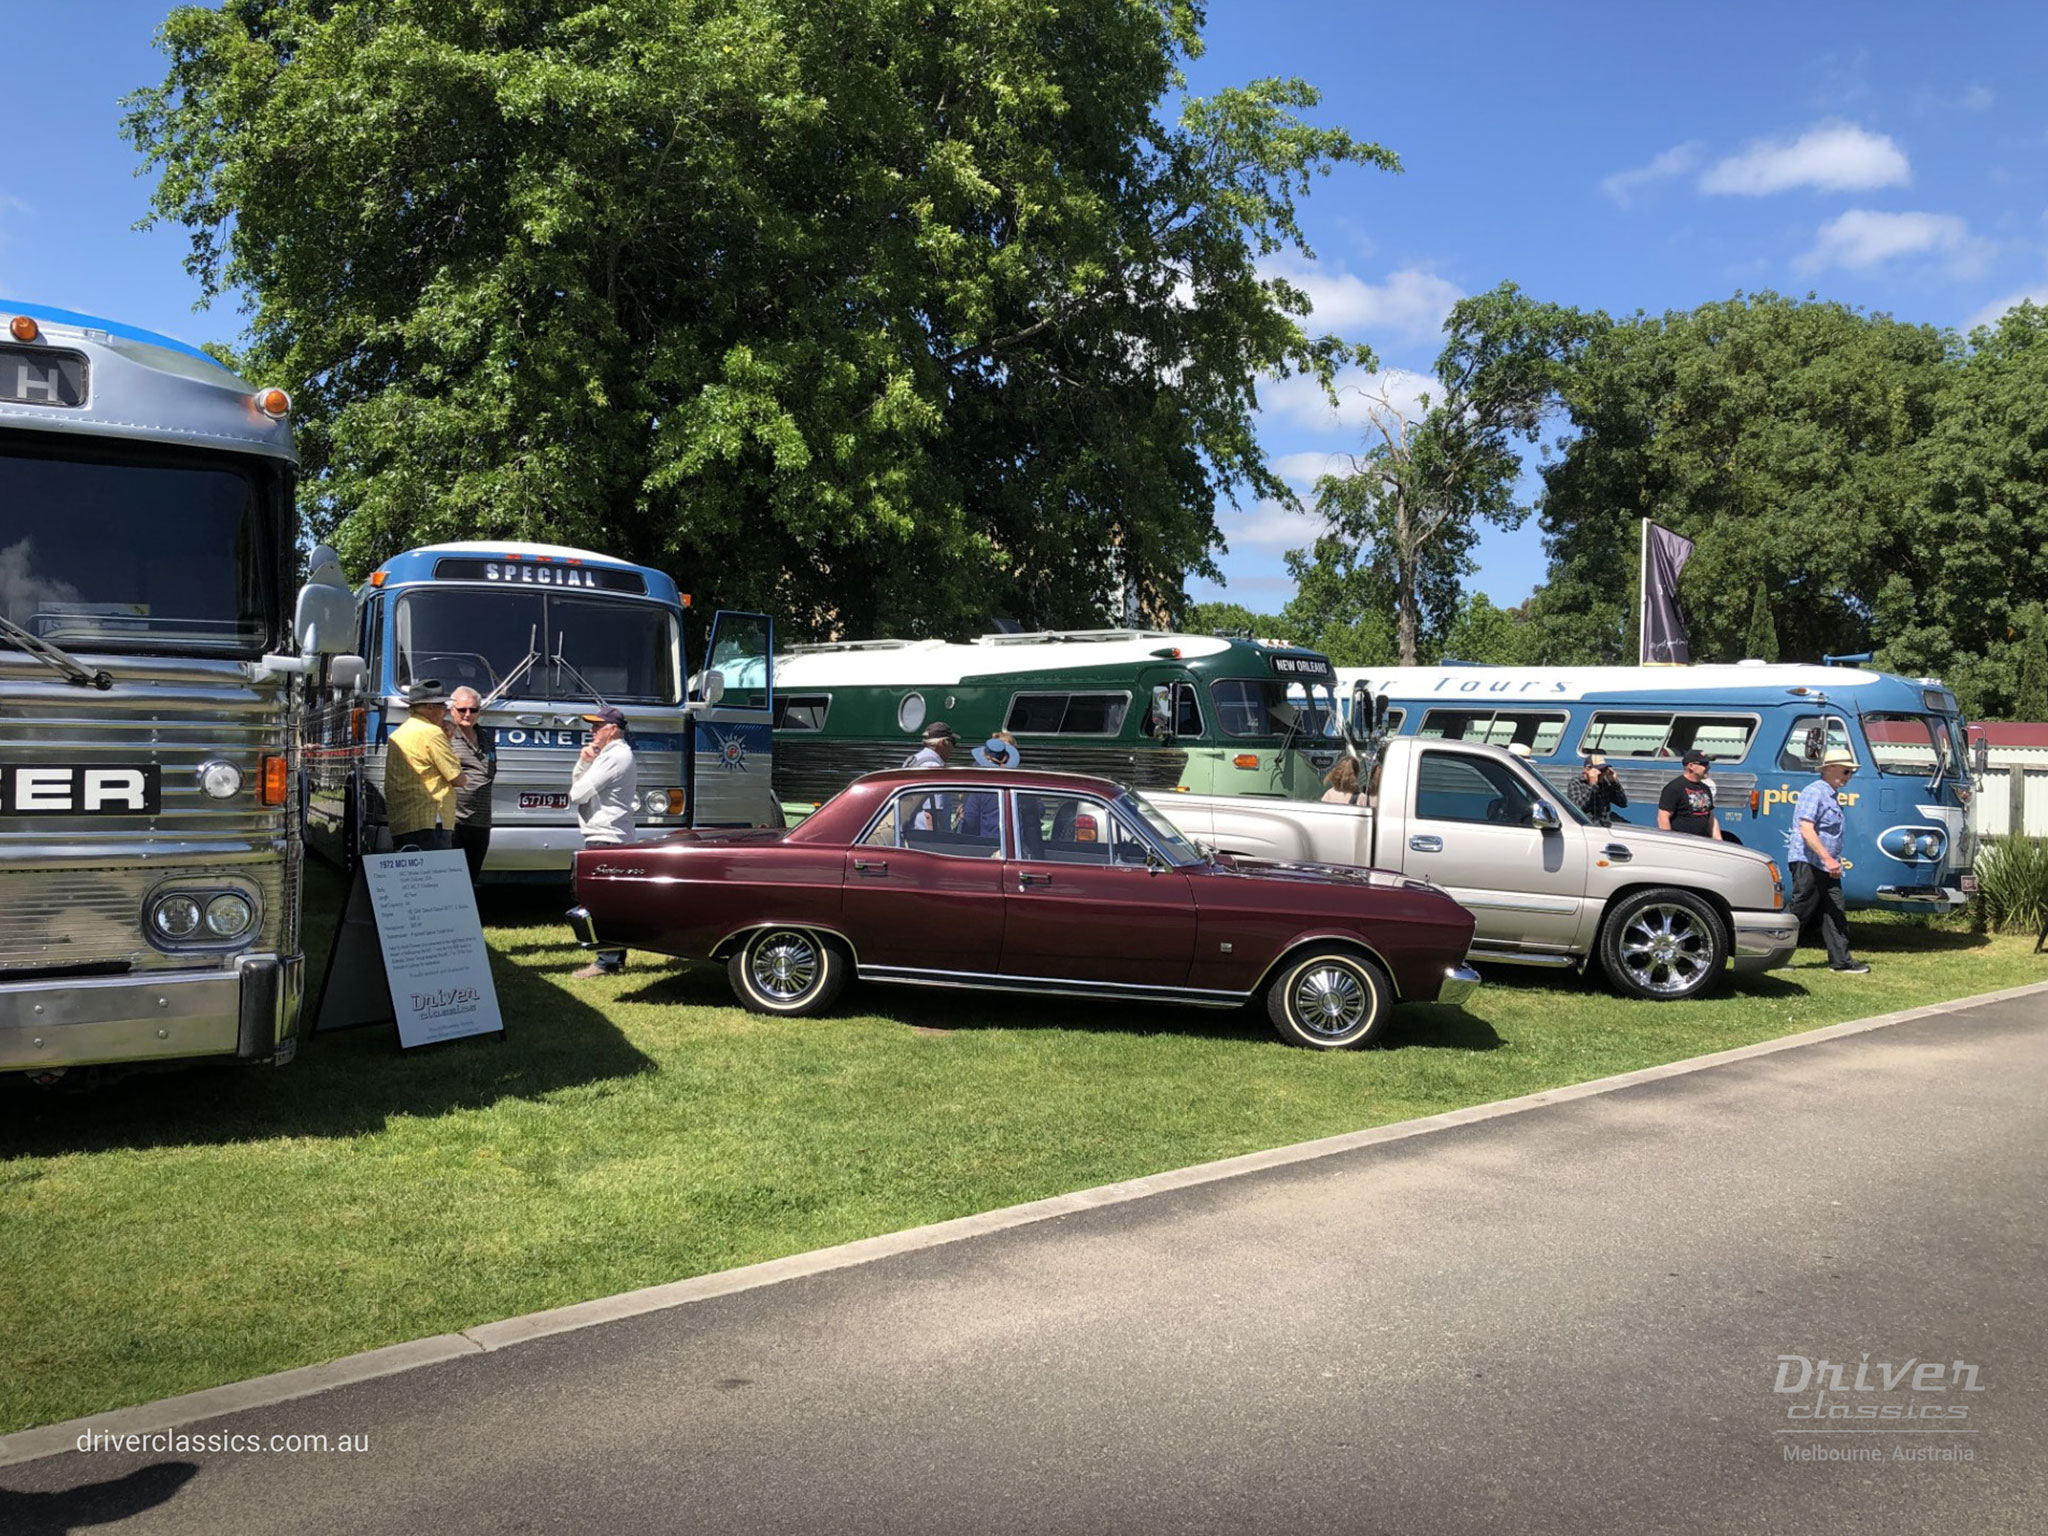 Ford Fairlane 500 (1968 model), with other historical vehicles inc: MCI MC7 bus, US Flxible Clipper bus, Ansair Flxible Clipper bus and a Cheverolet Silverado pick up truck. Photo taken at Yarra Glen in Novermber 2023